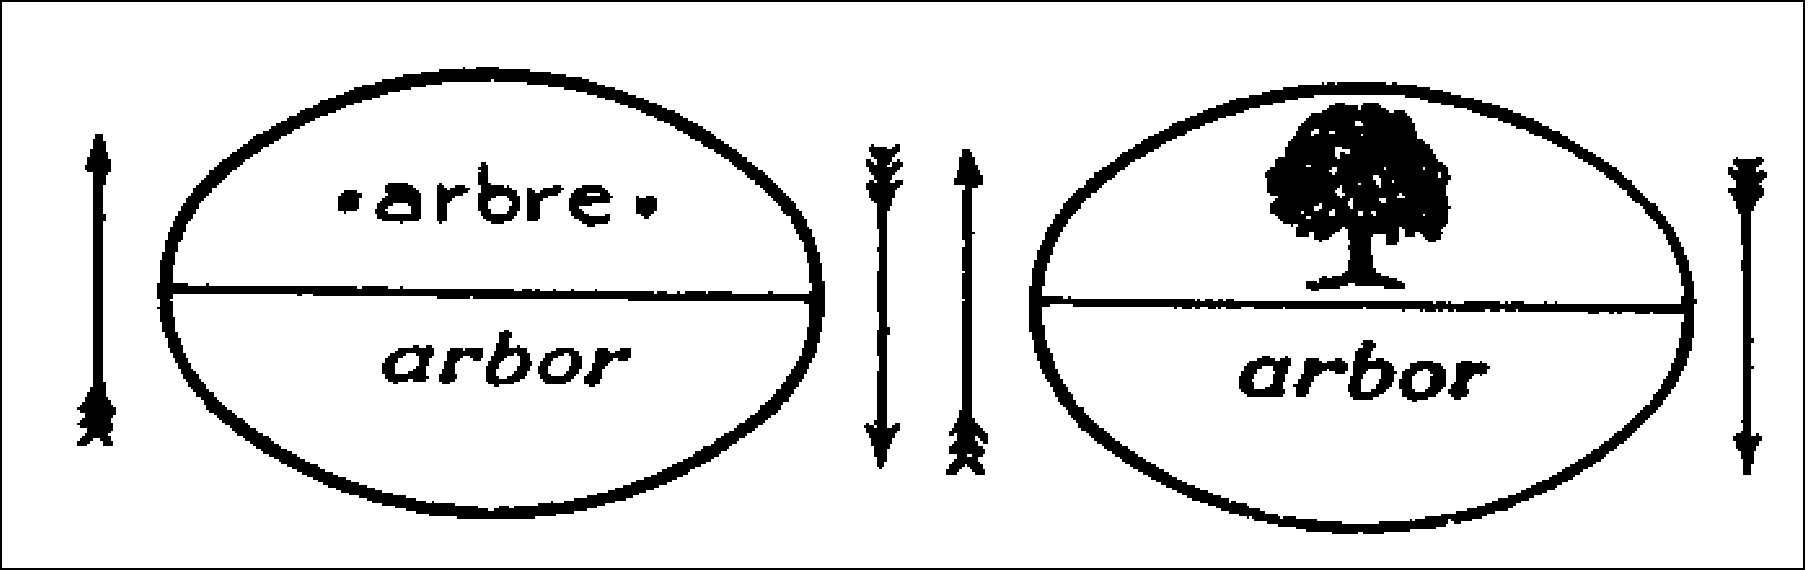 Ferdinand de Saussure’s schema of the sign, with the signified (concept) over the signifier (sound-image) and arrows to indicate the mutual dependence of the terms upon one another.